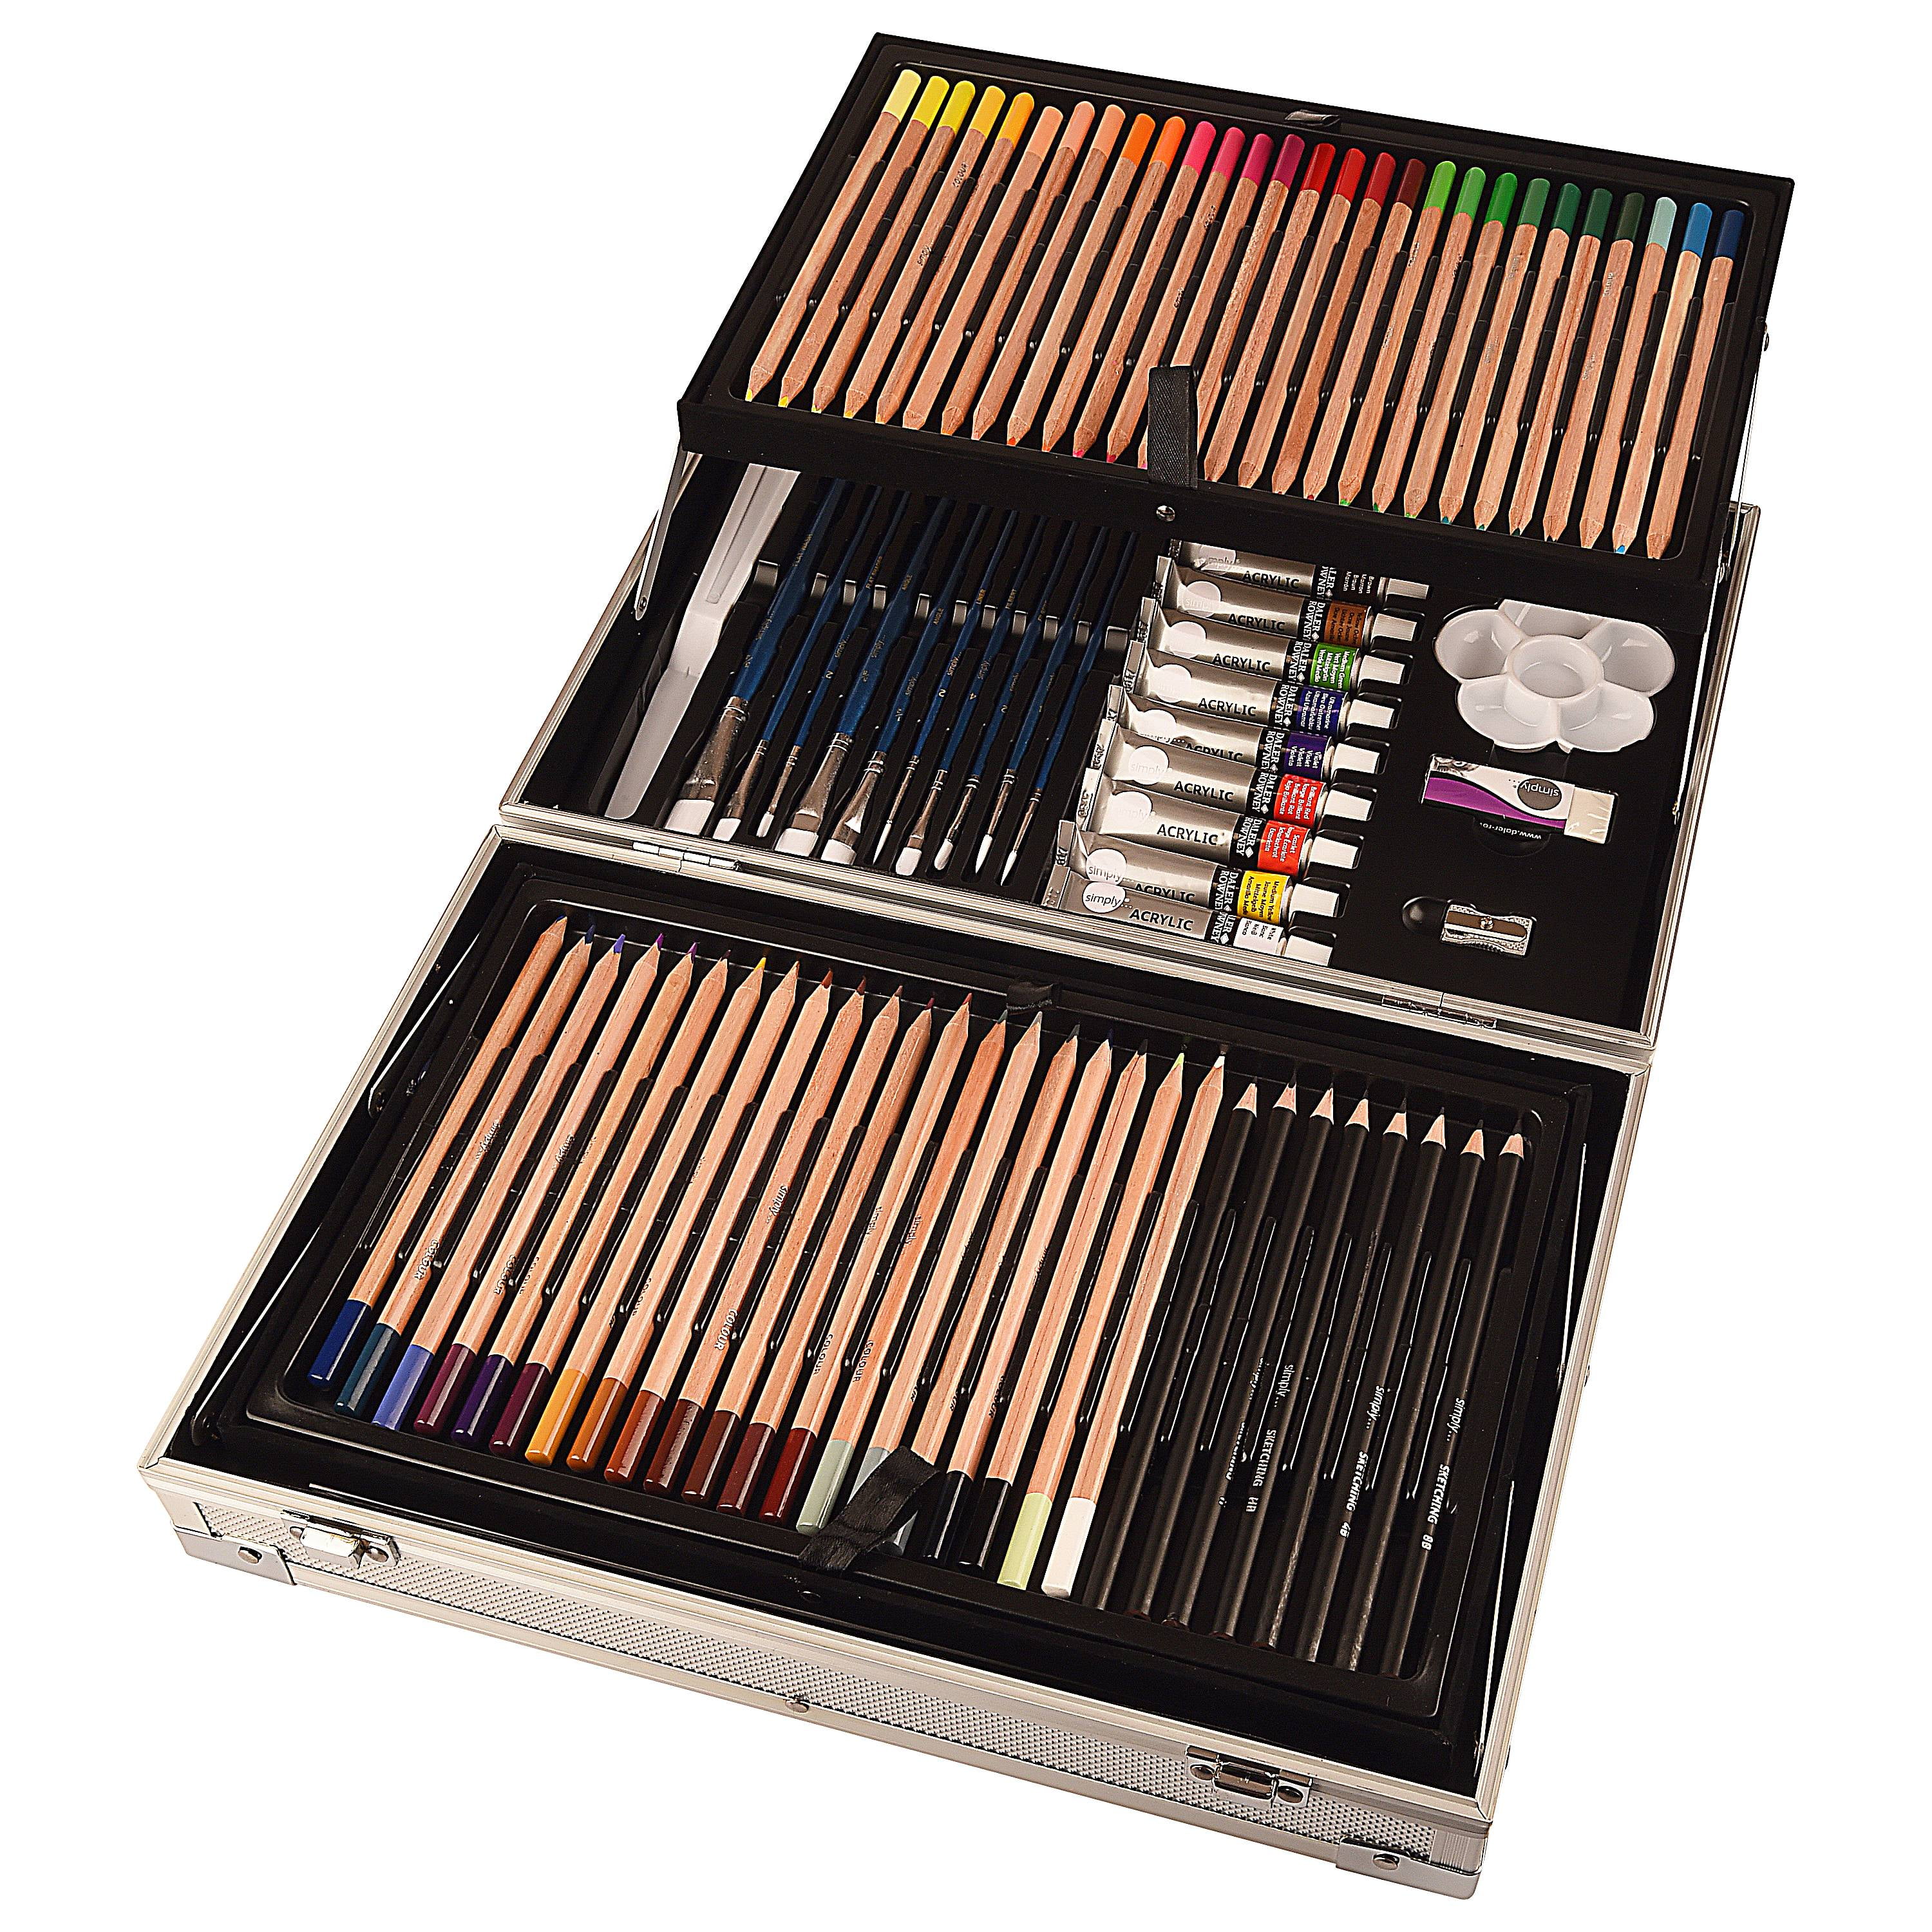 Raw Materials Art Supplies - You didn't know you needed this Pro Art  12-piece All-in-One Drawing Kit 💥ON SALE for $5.99💥 (regularly $7.99 so  🧮 that's 25% OFF) Look at that, you